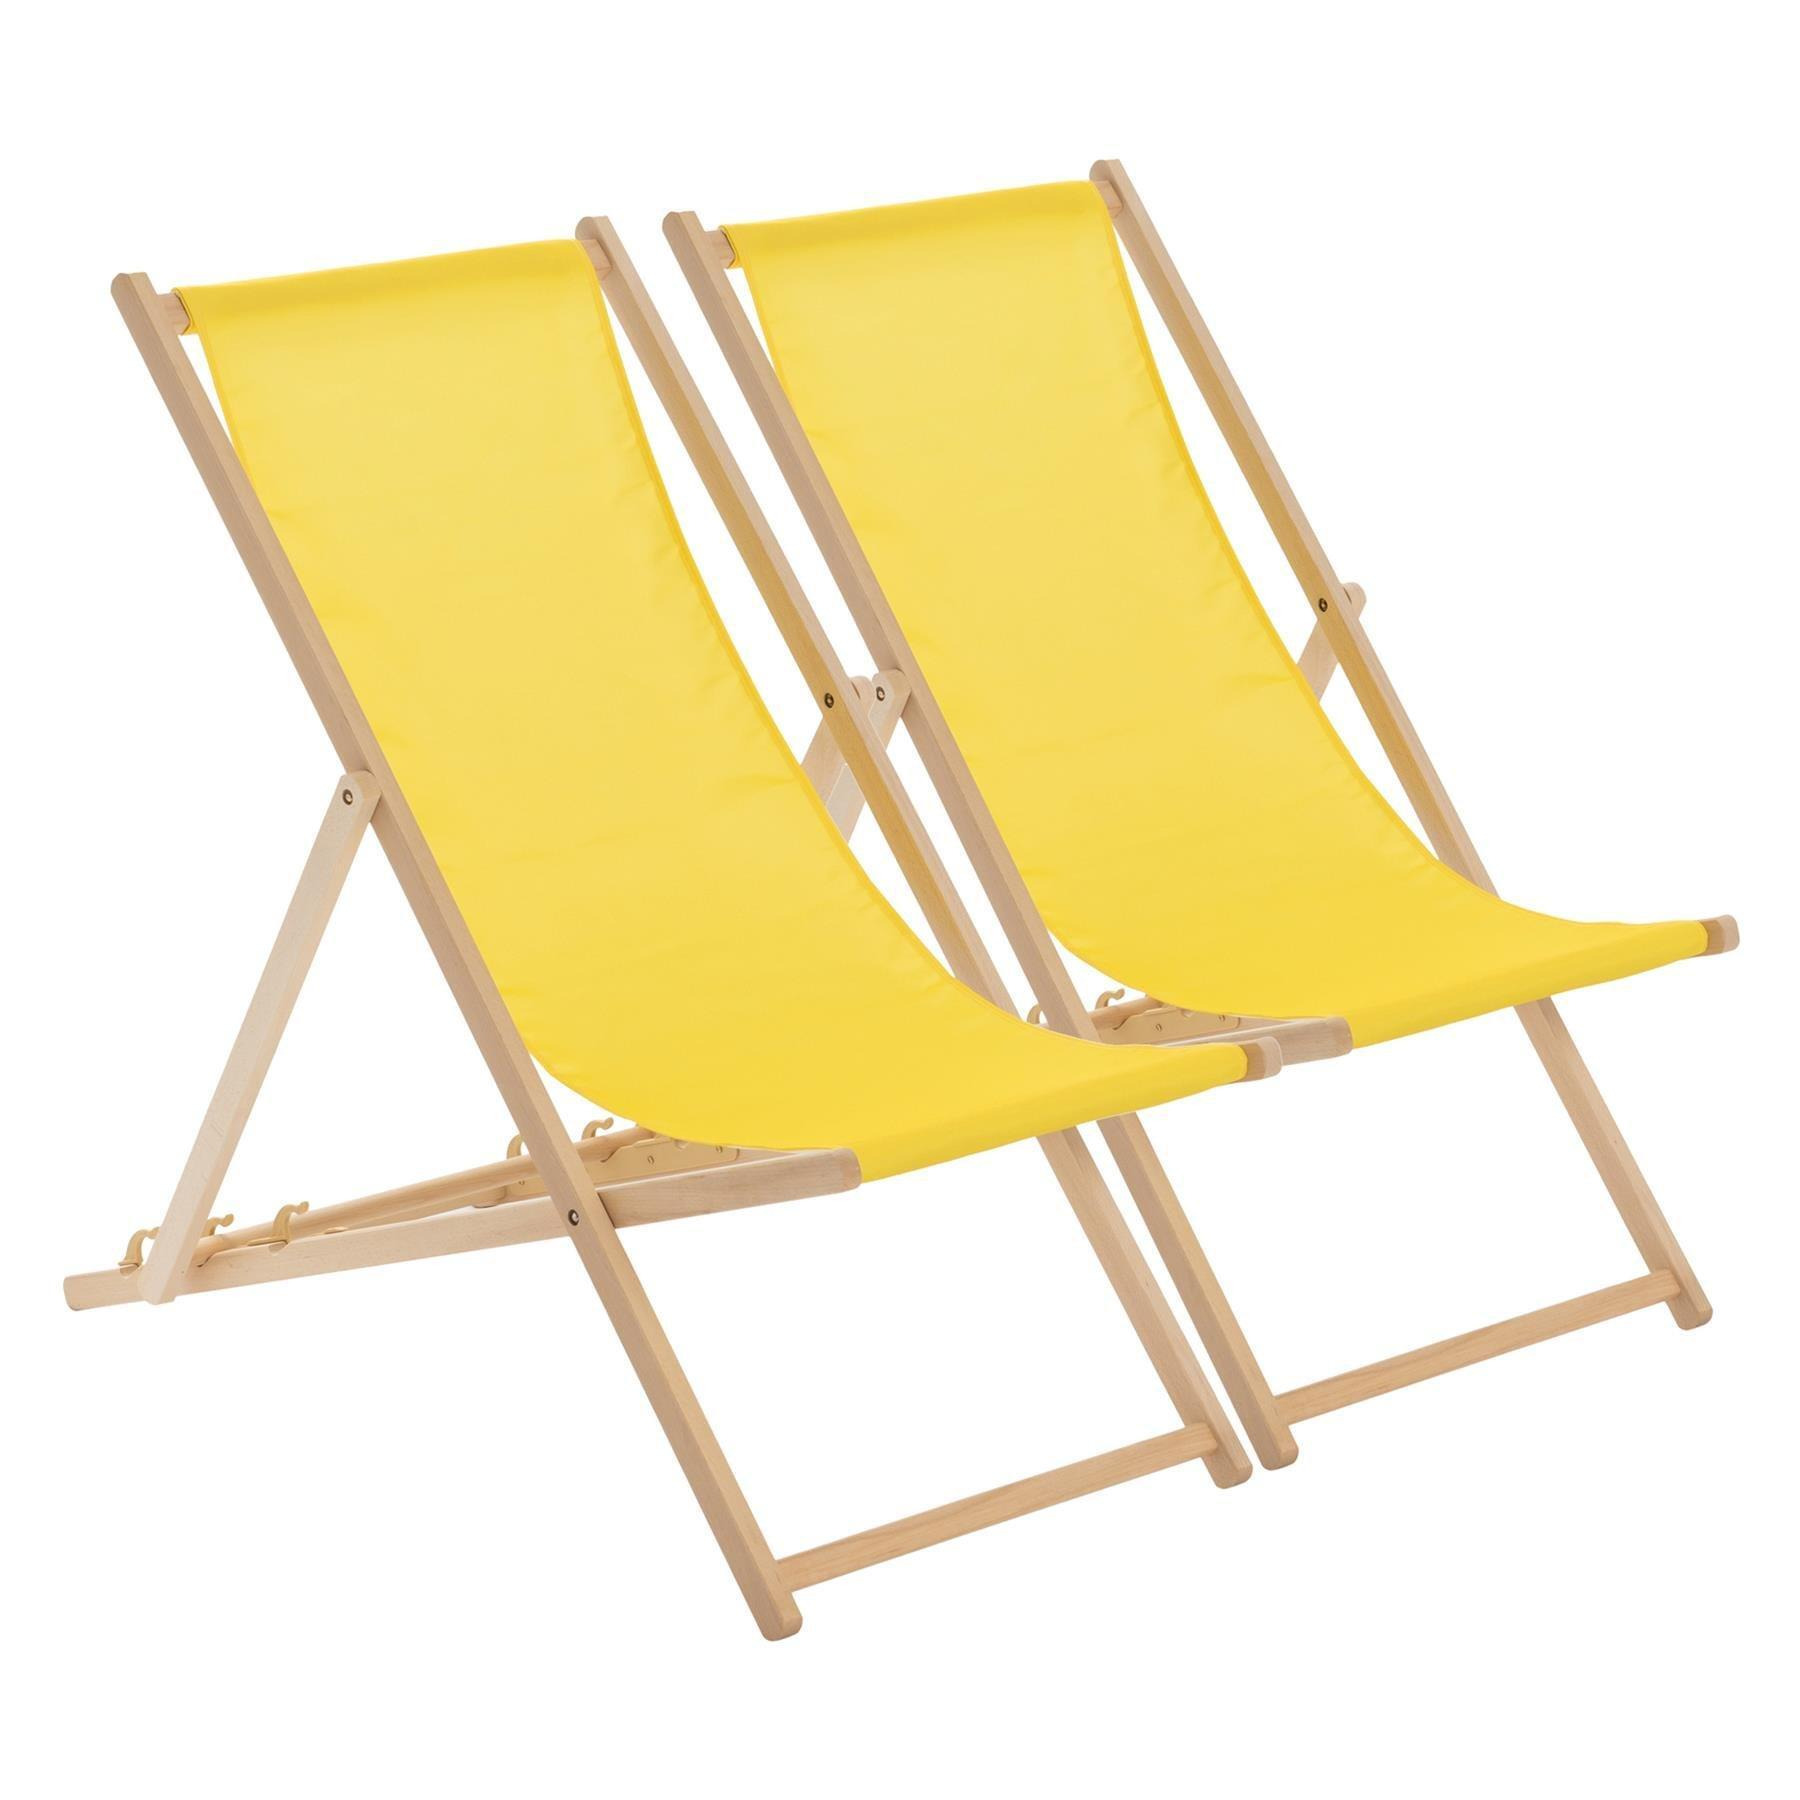 Folding Wooden Deck Chairs Yellow Pack of 2 - image 1